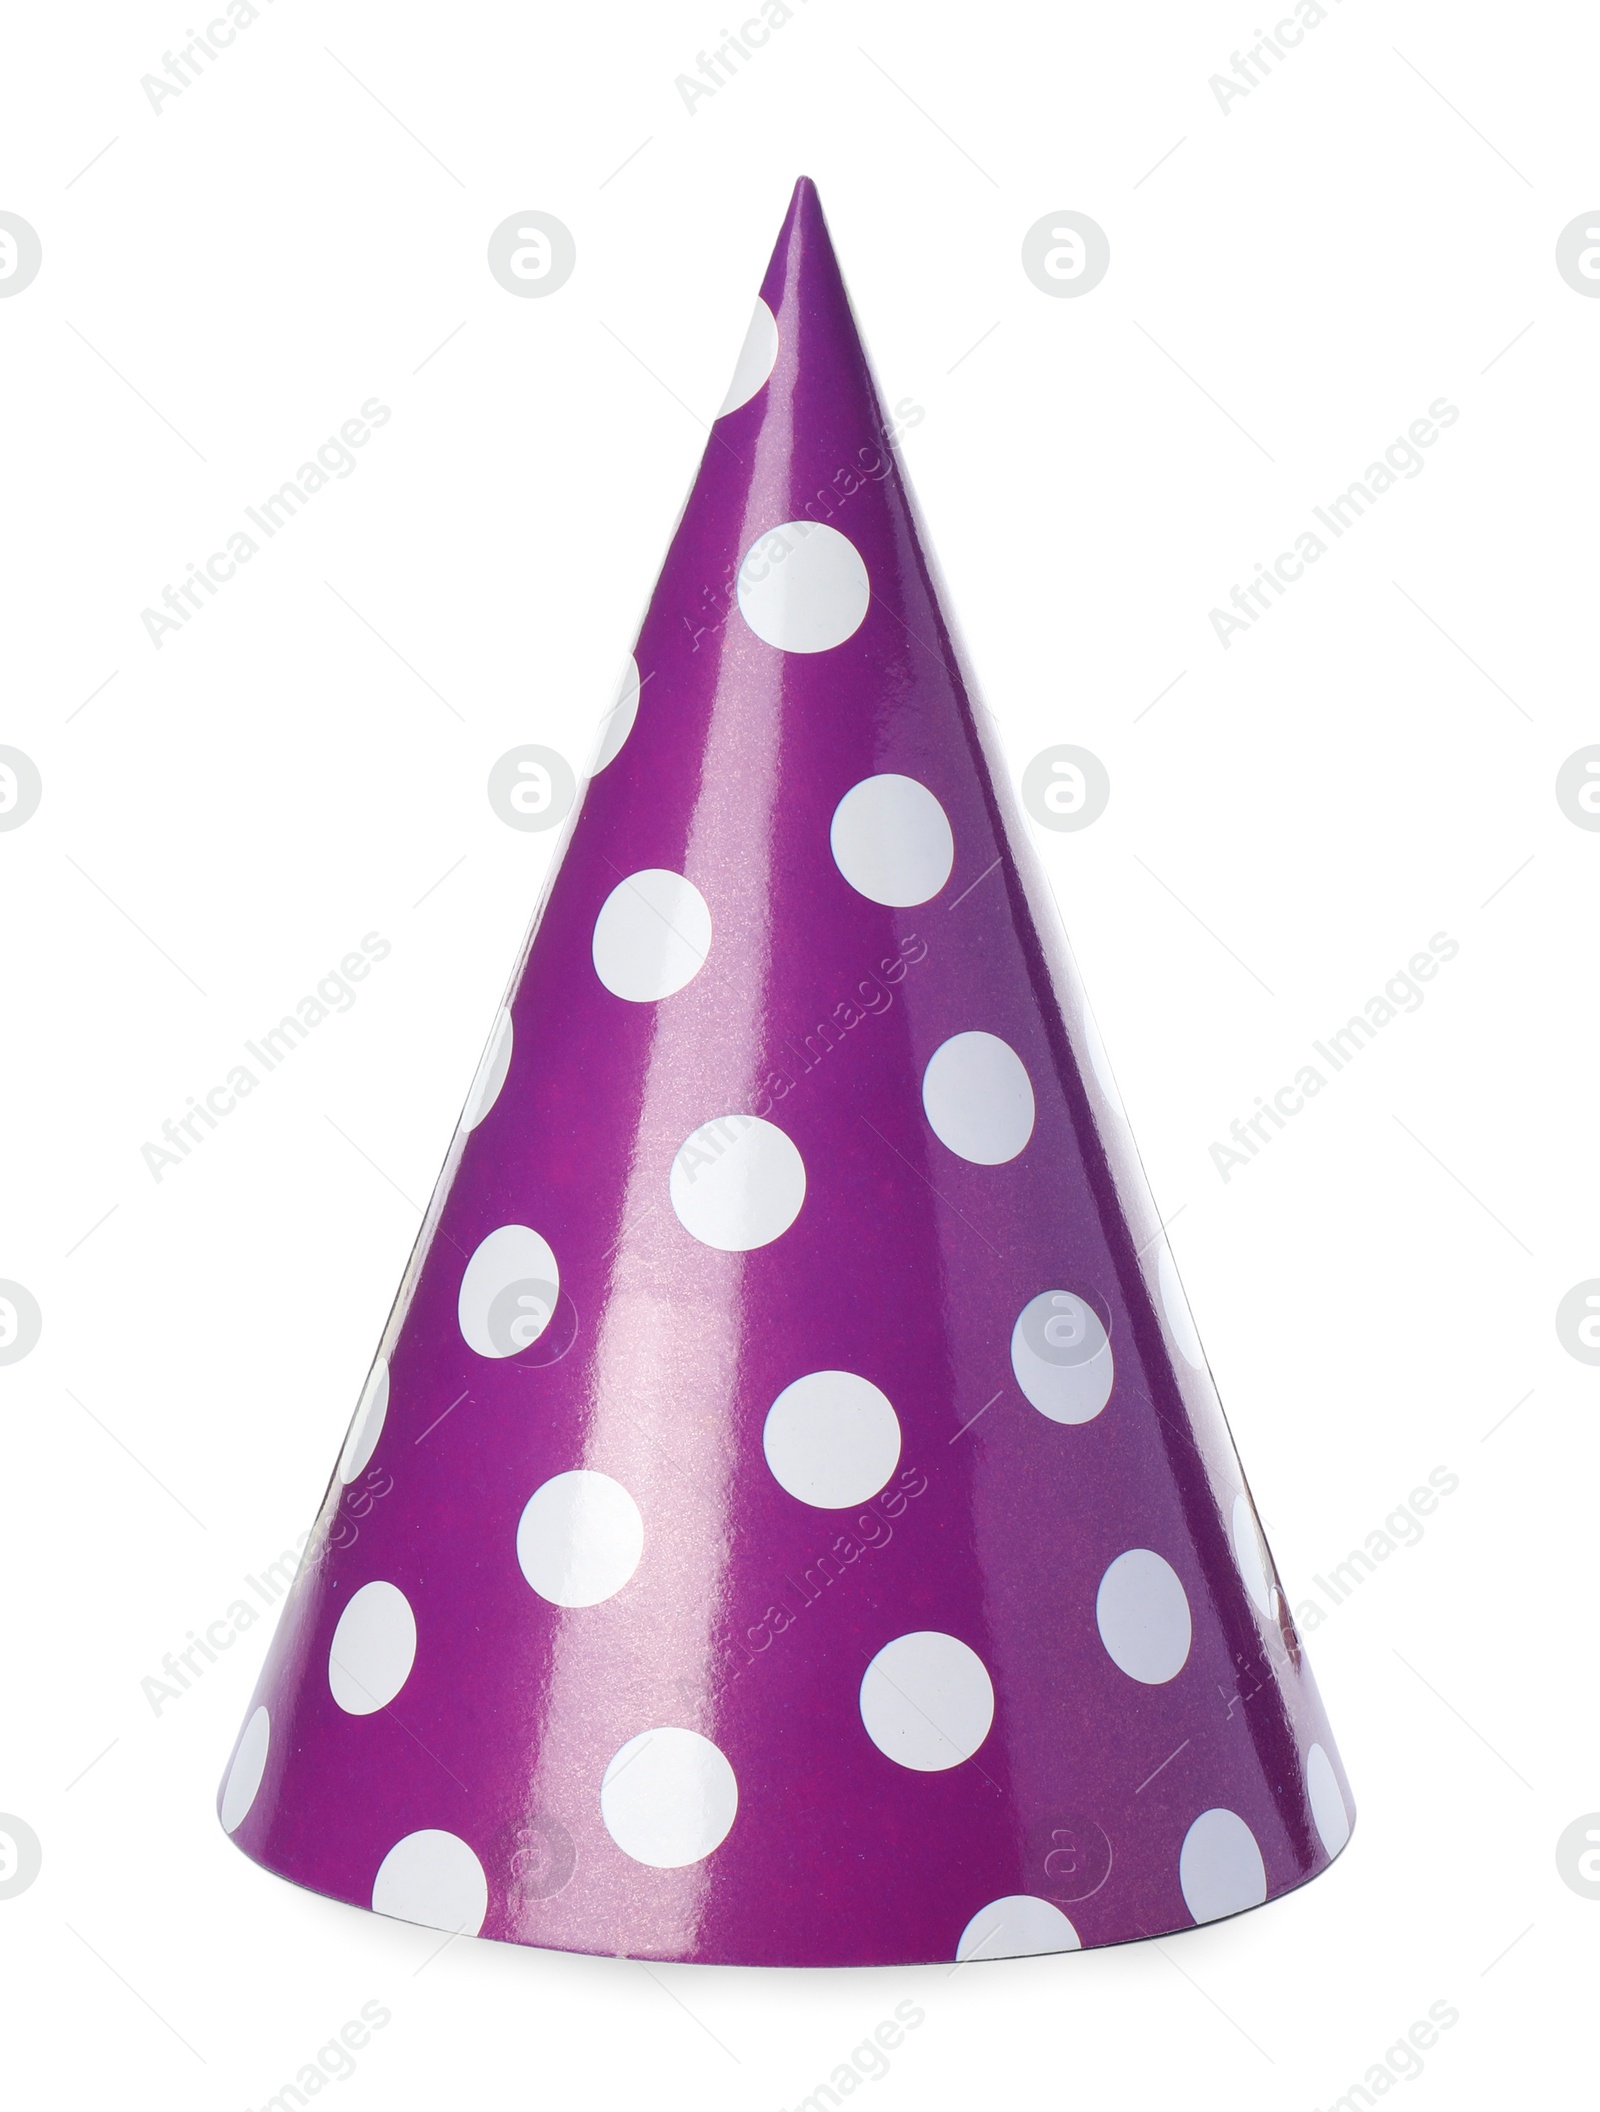 Photo of One purple party hat isolated on white